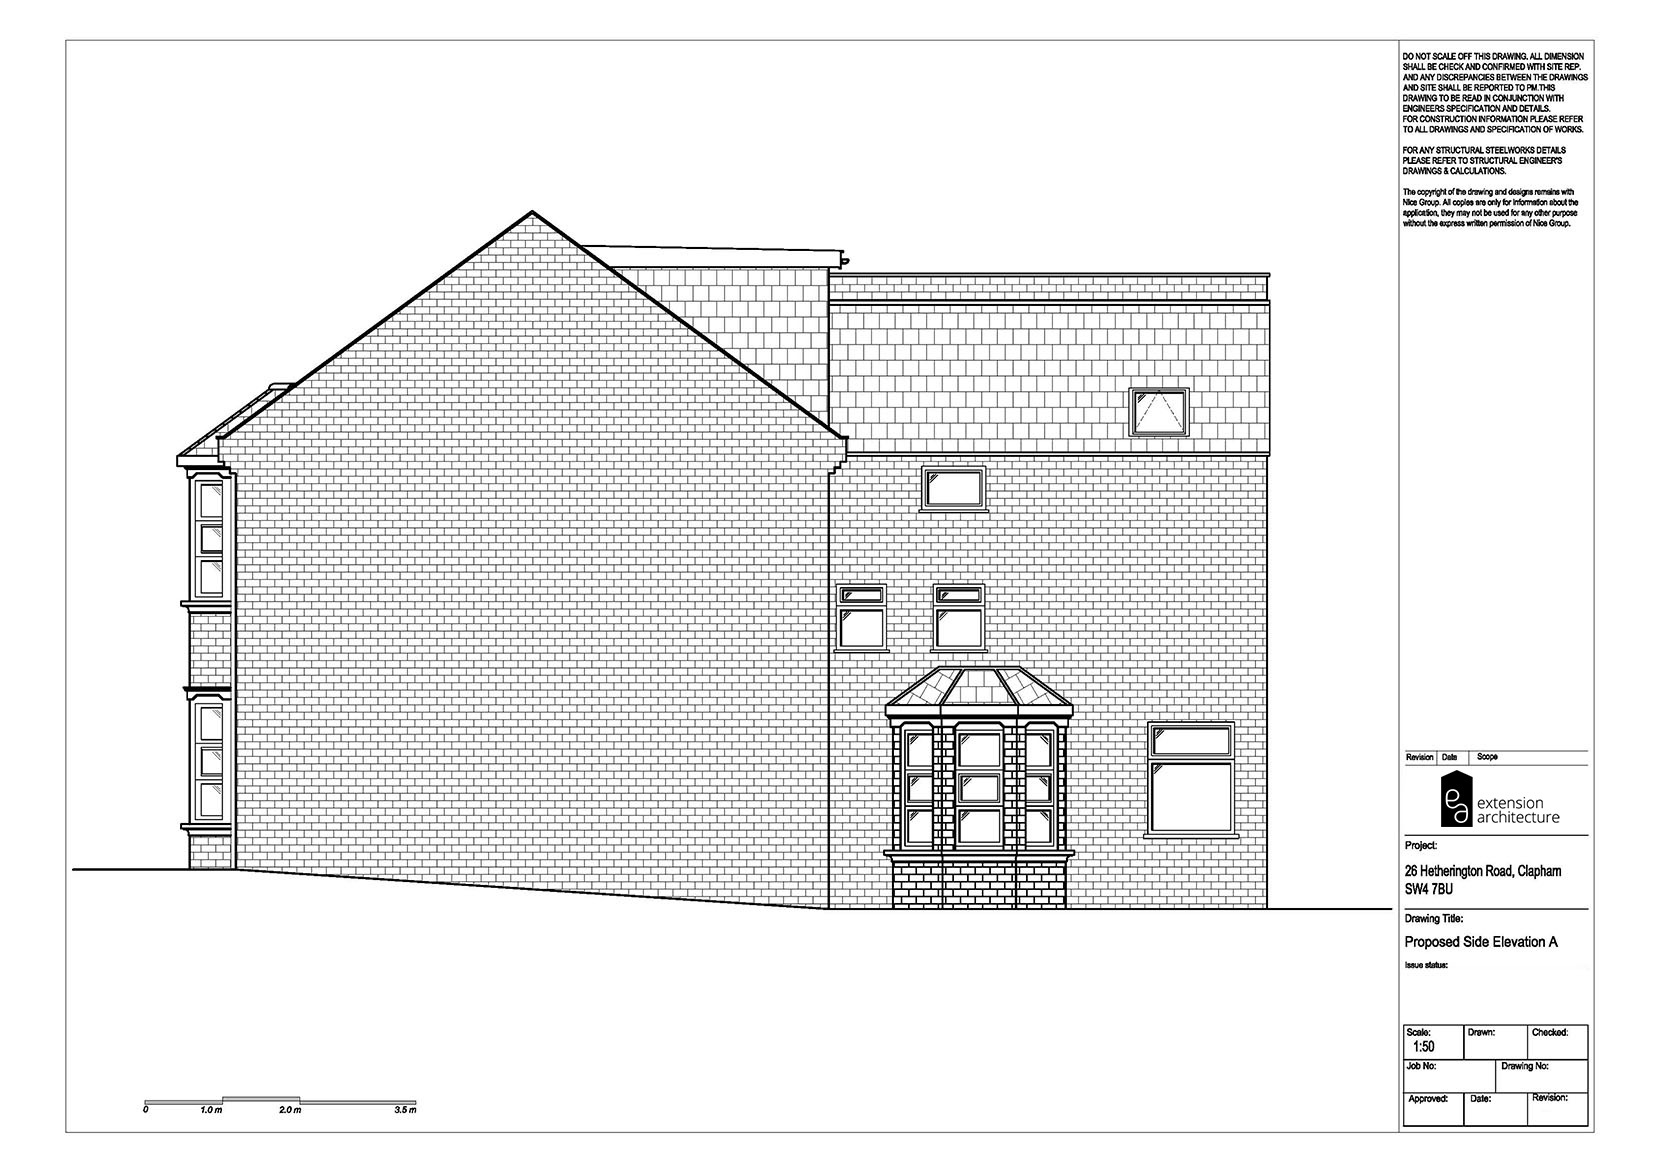 RESIDENTIAL 26HR proposed basement extension